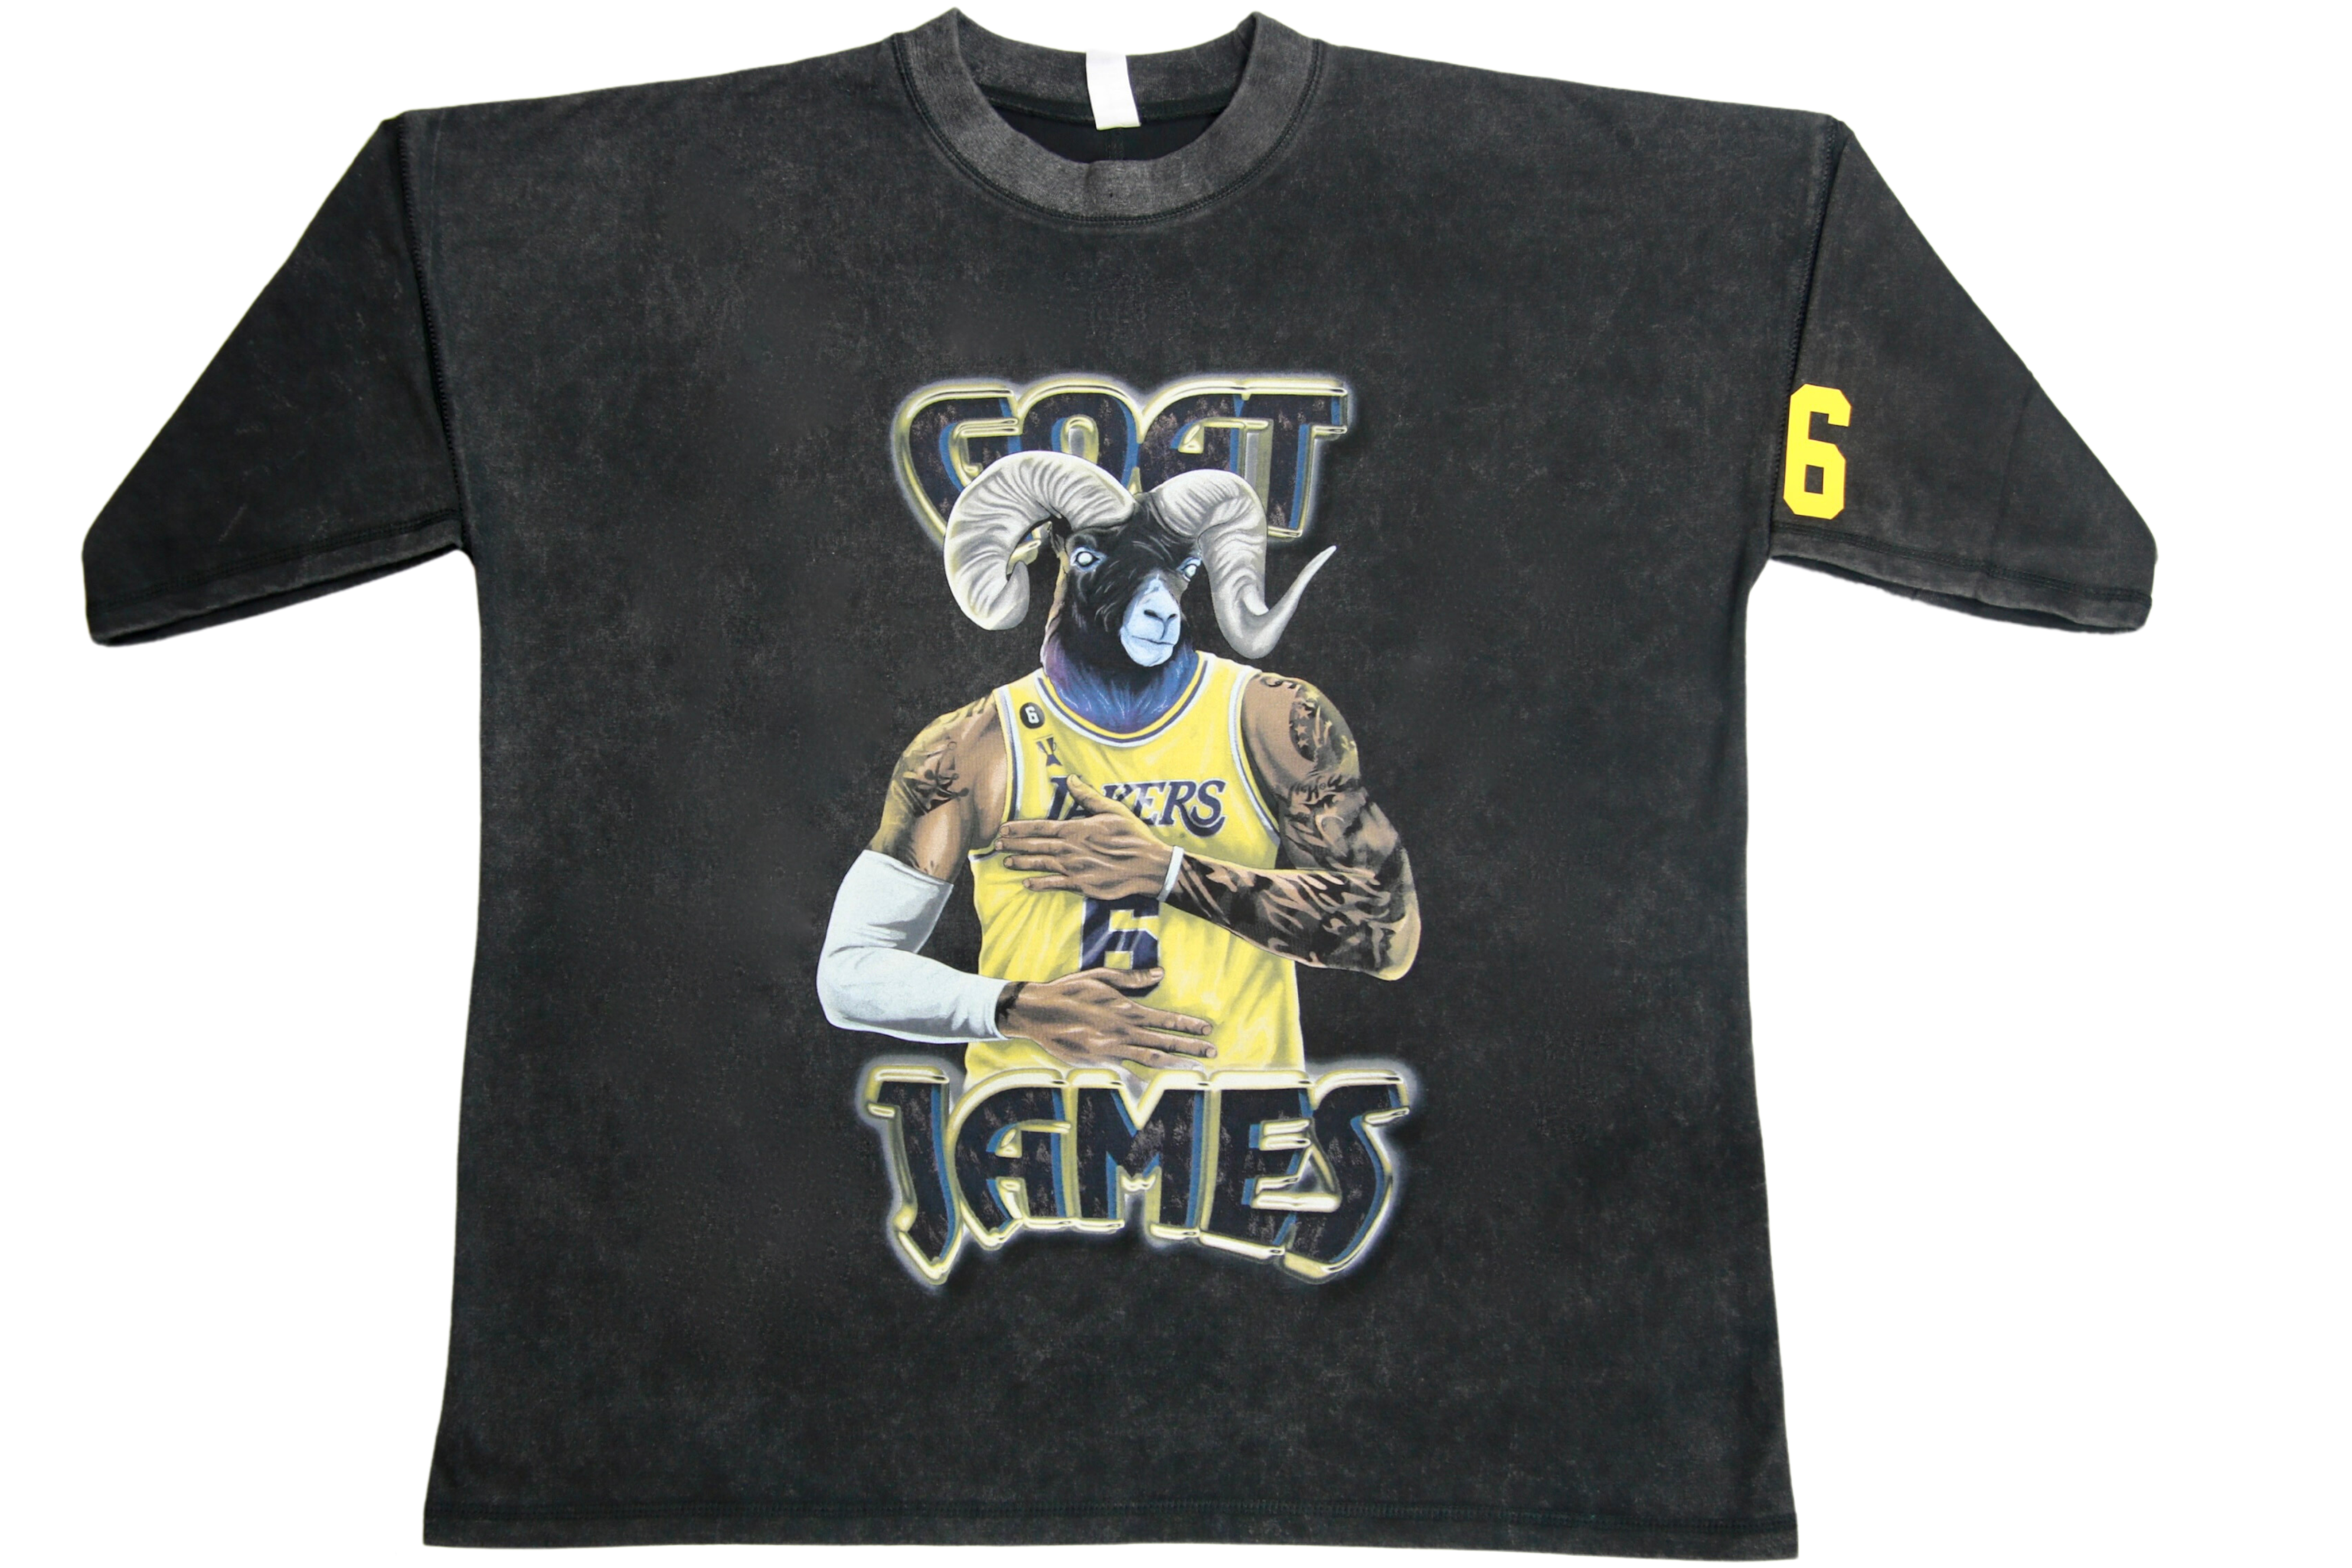 Goat James Heavyweight Graphic Tee "Vintage Wash & Gold"